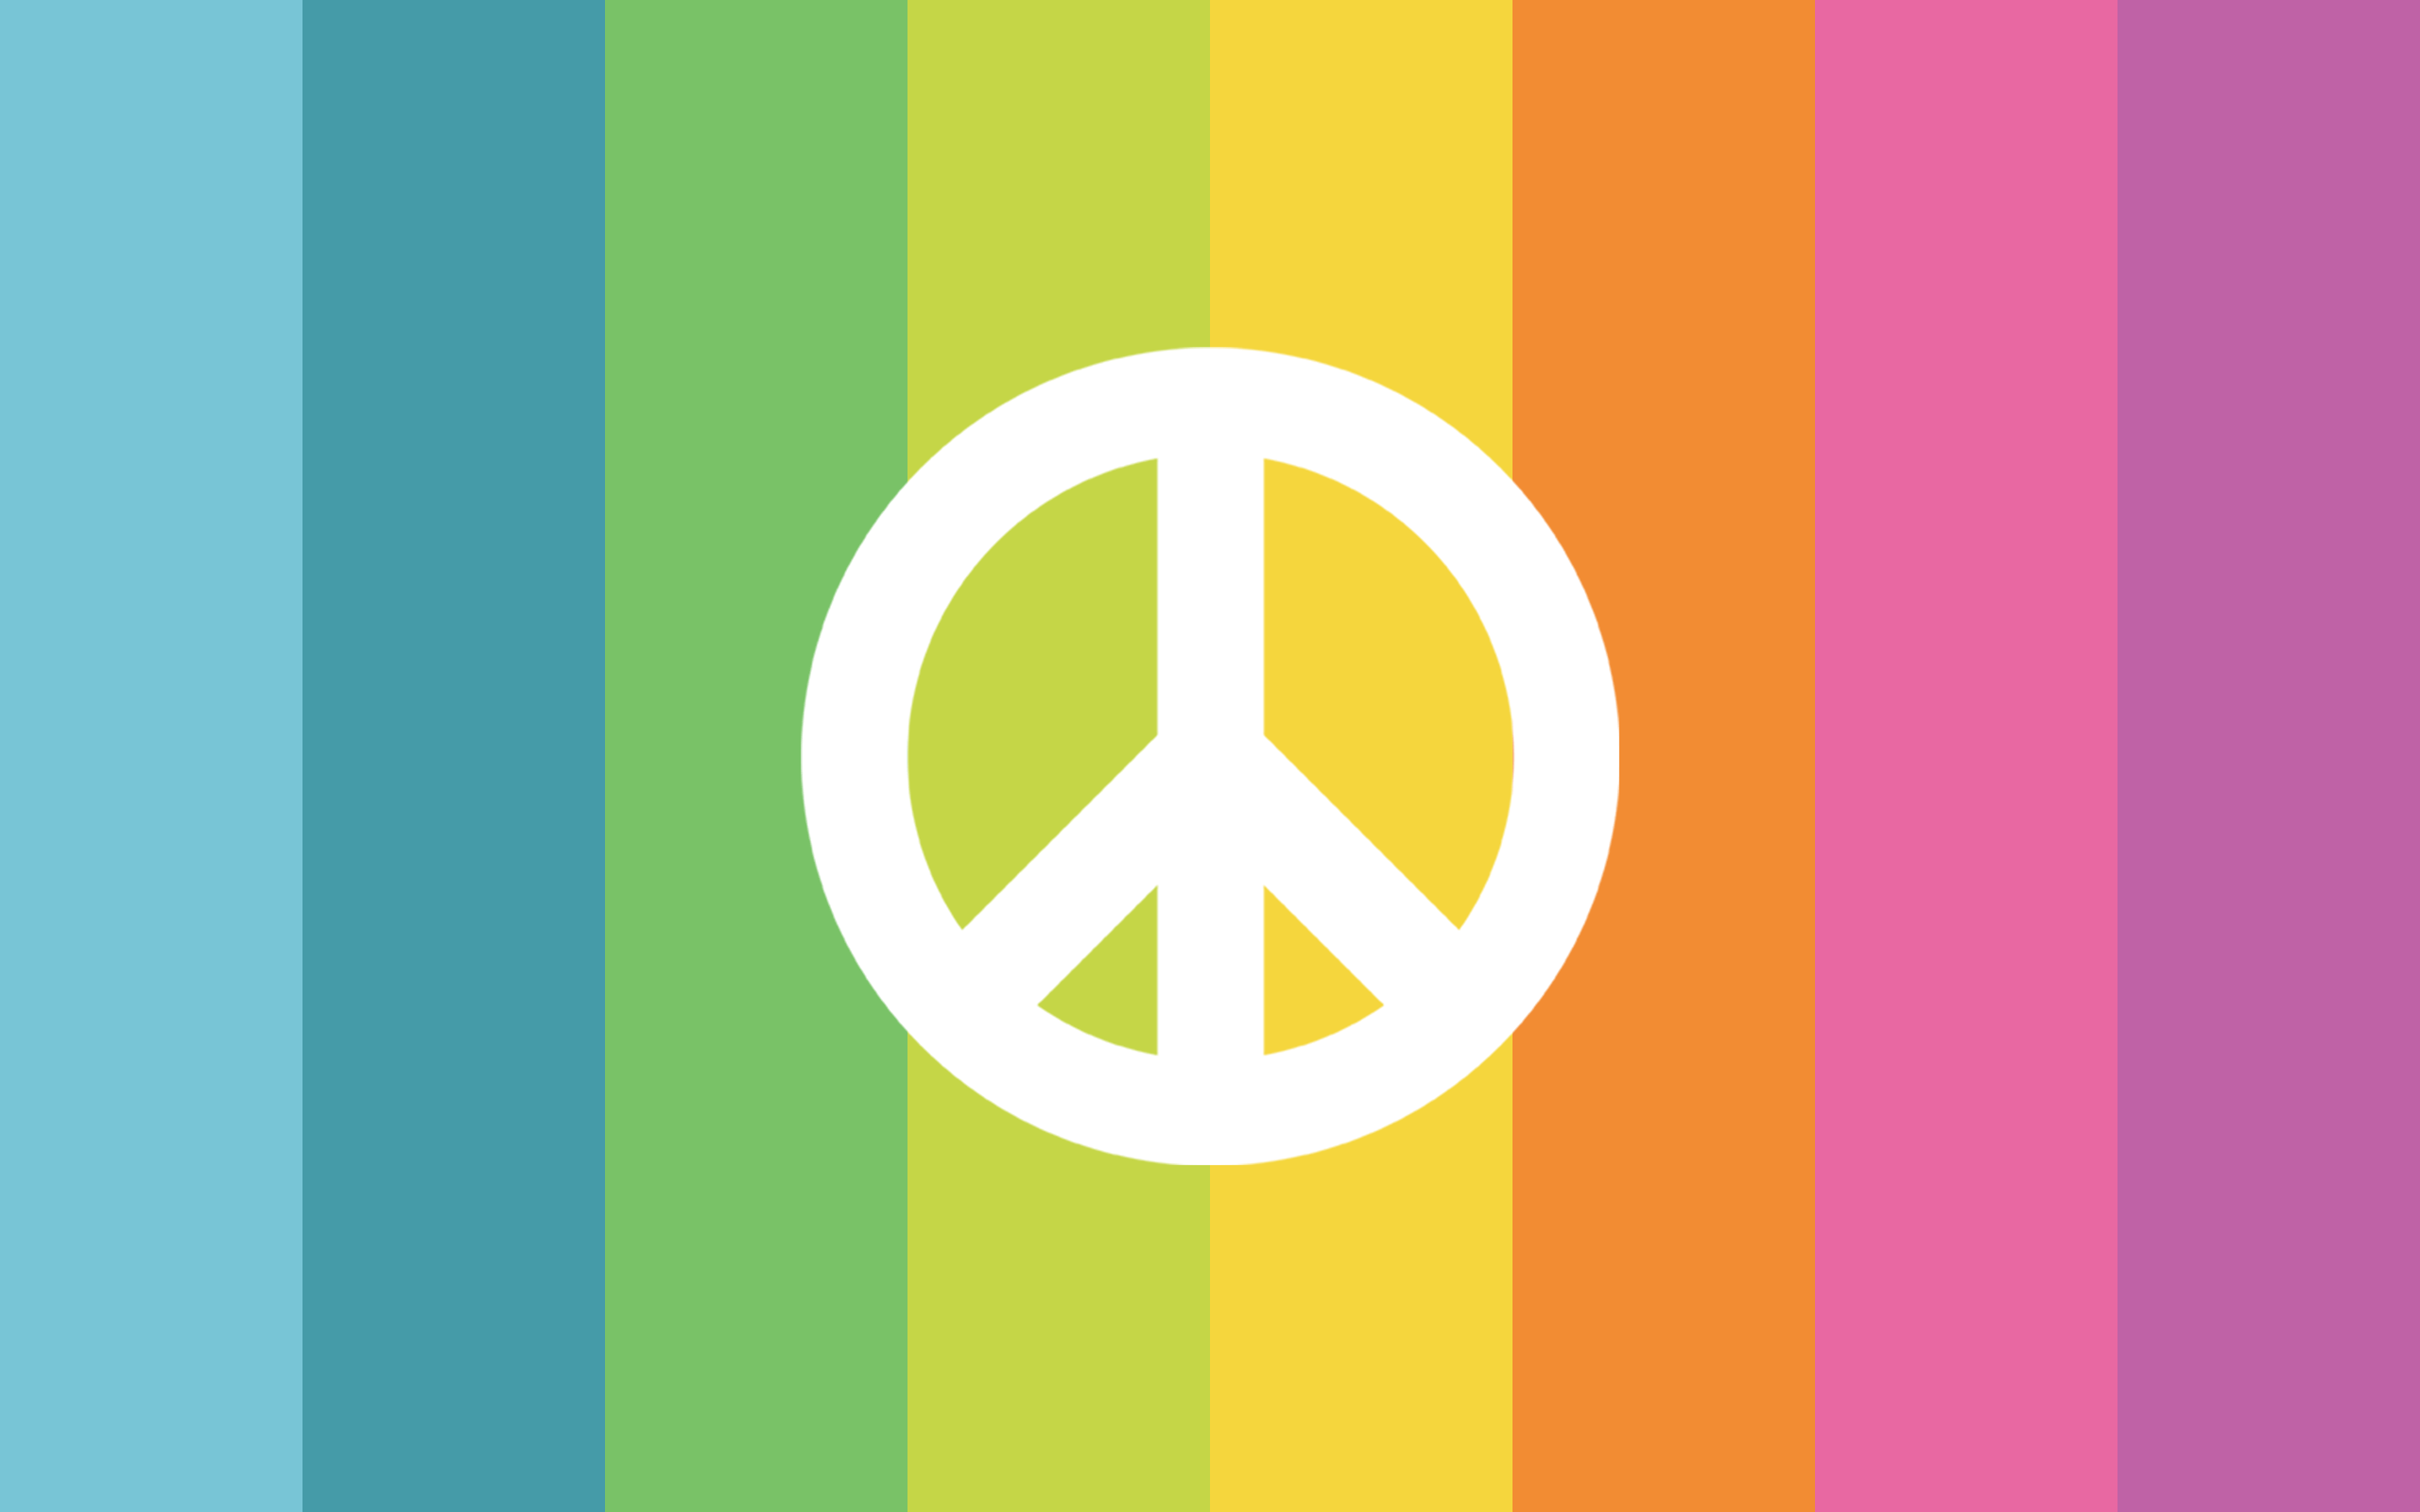 peace sign backgrounds for computer